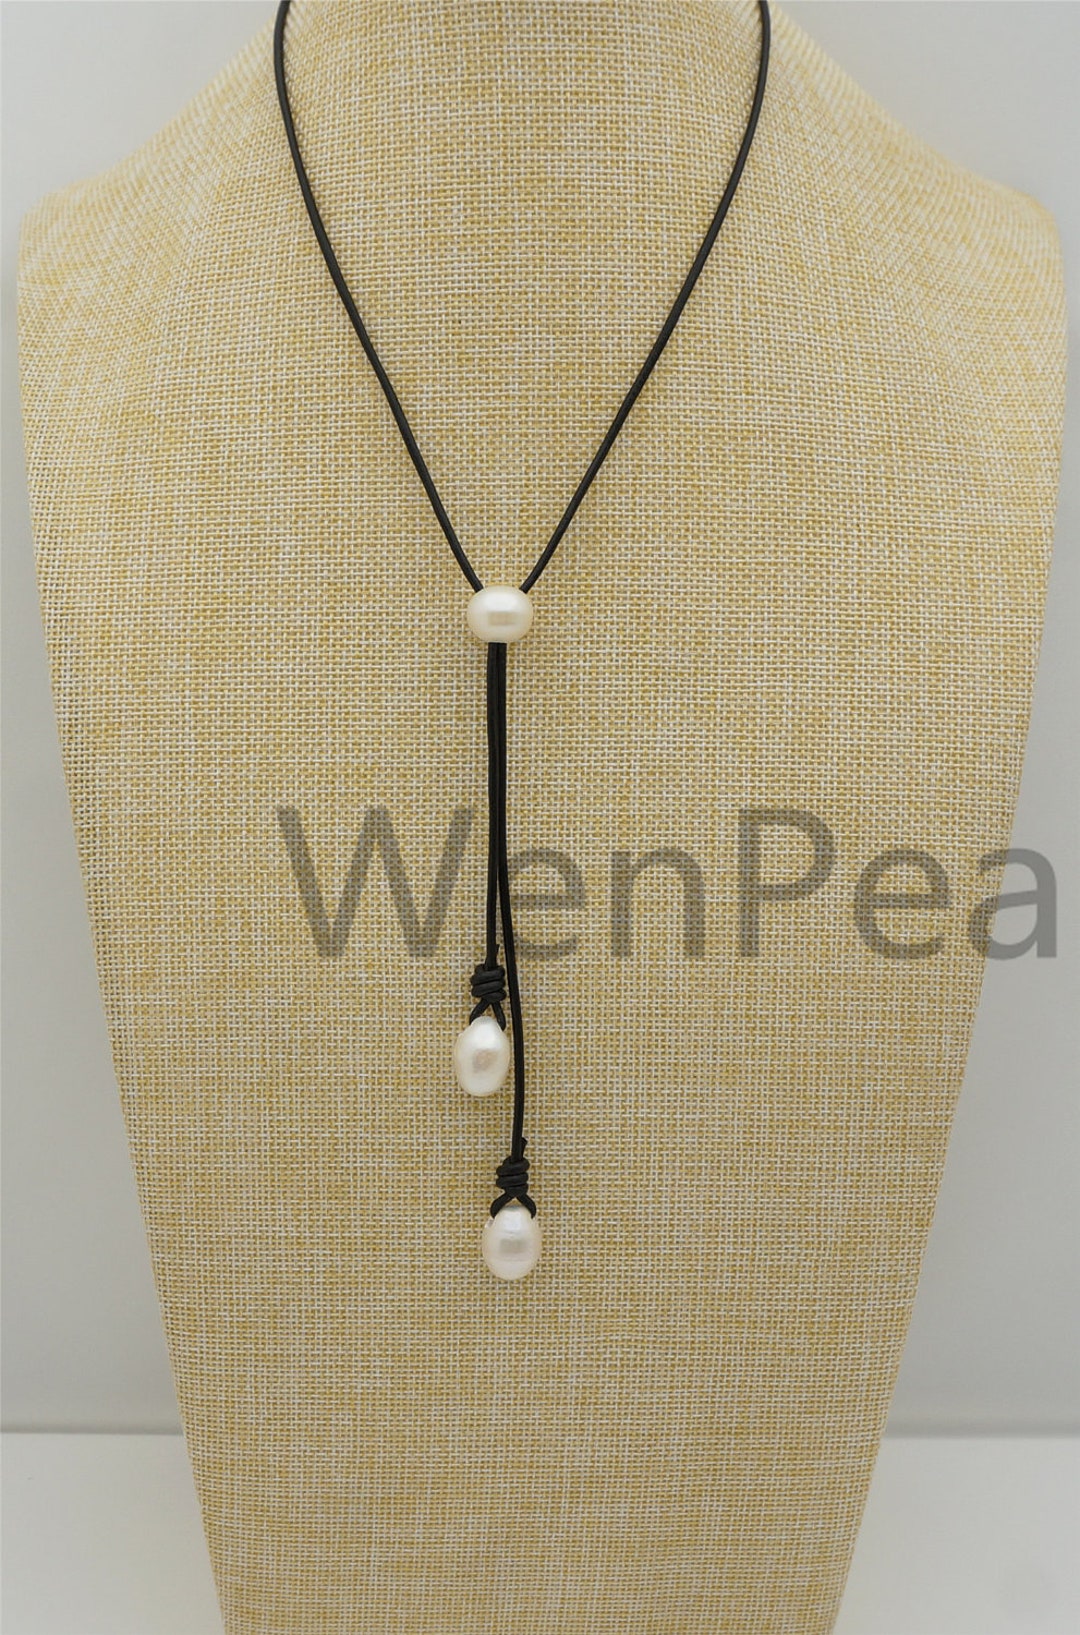 Two Drop Big White Pearl Leather Necklace White Freshwater - Etsy